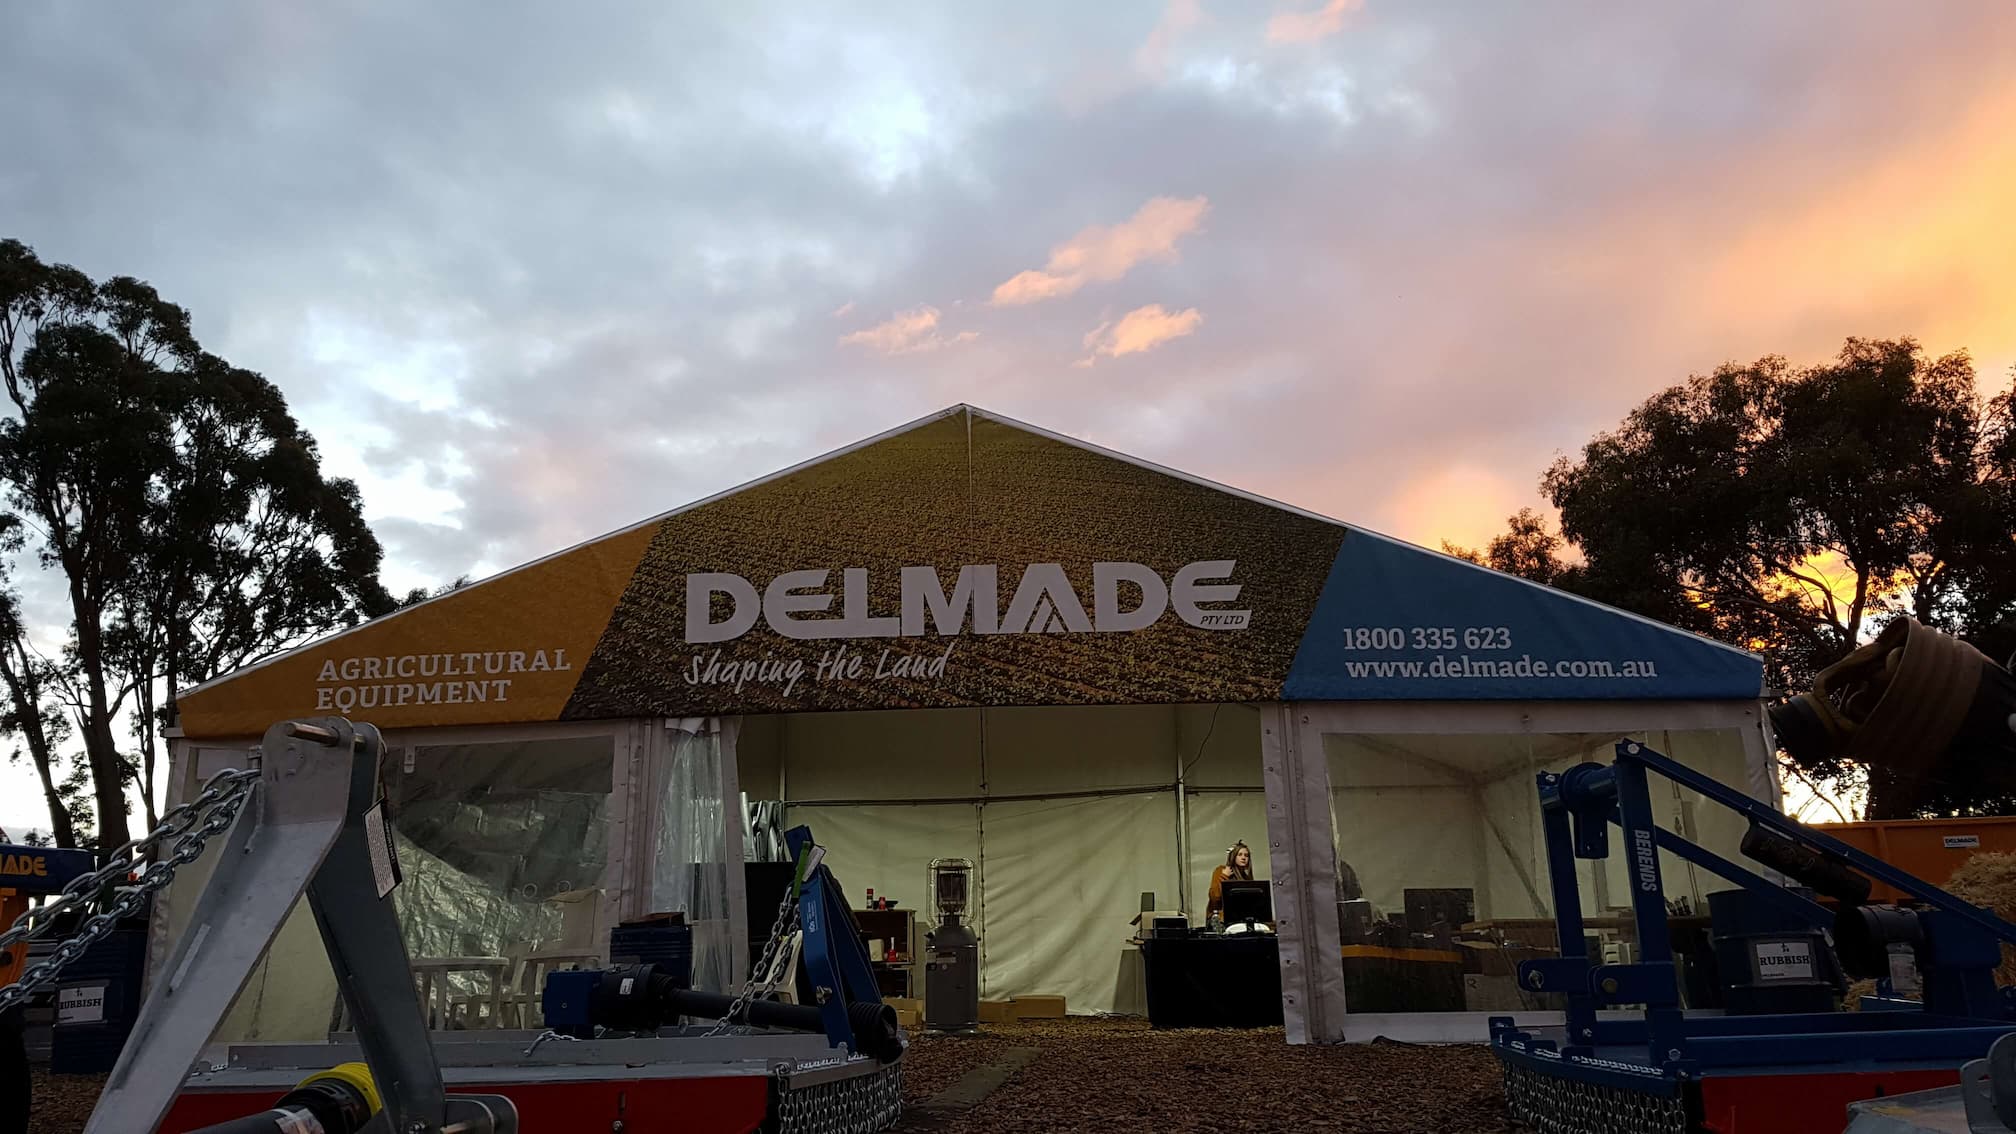 Delmade at Agfest 2019.  Tent, Agricultural Equipment and Sunset in the Background